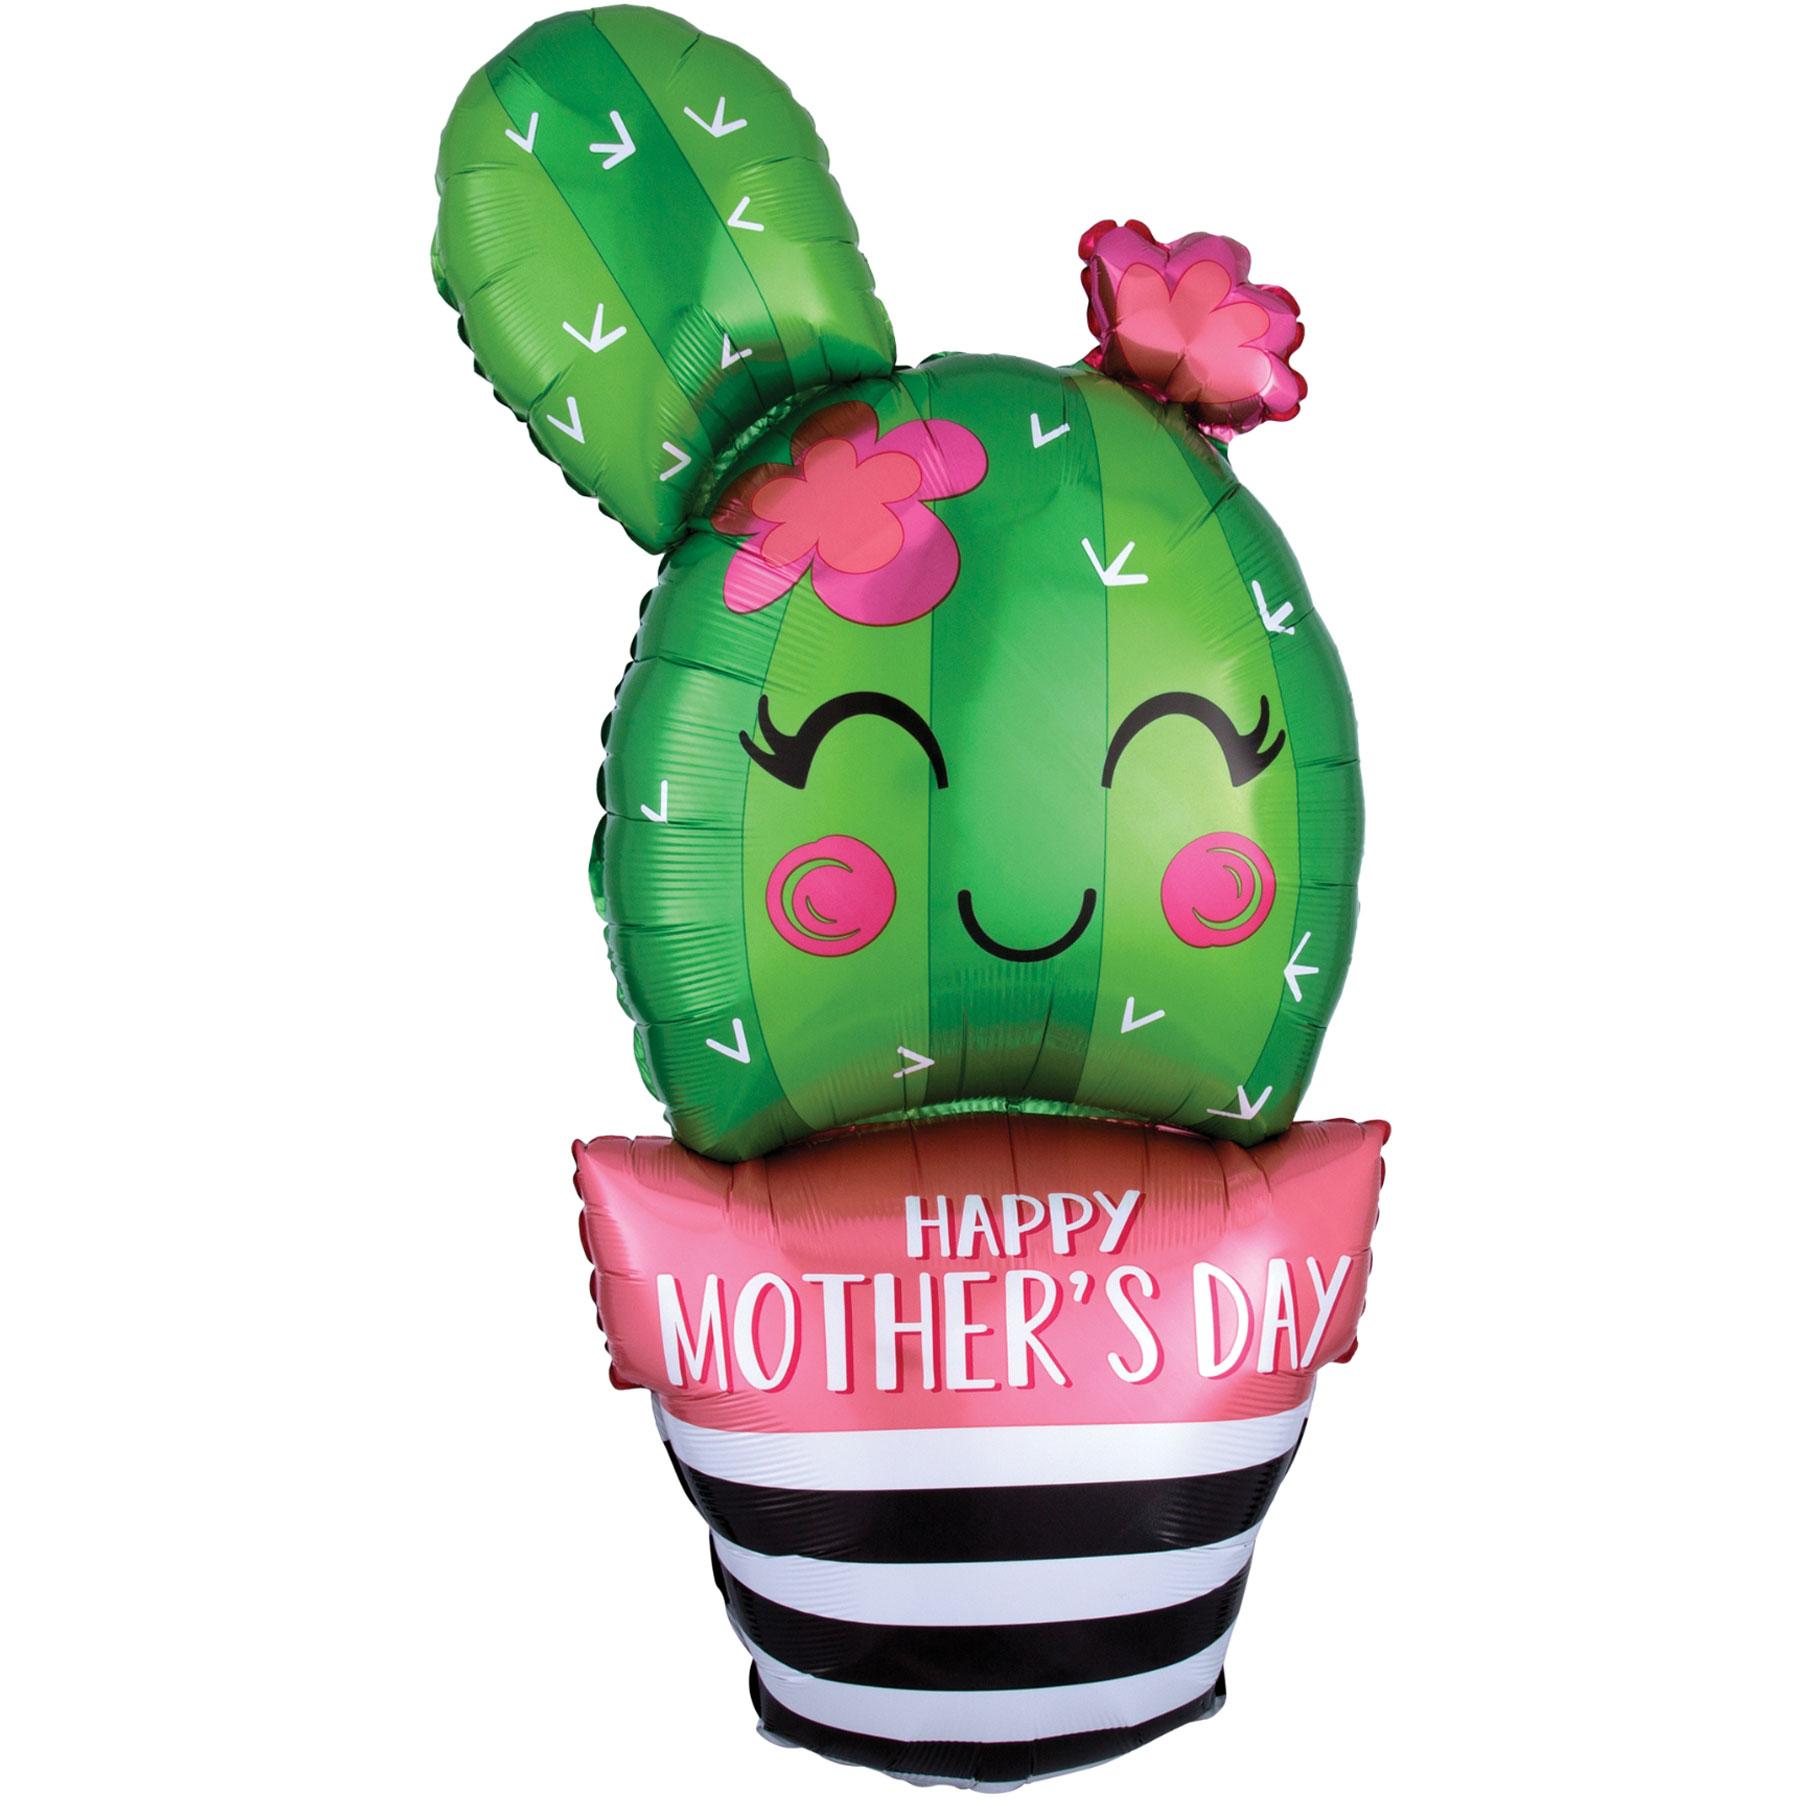 Happy Mother's Day Cactus SuperShape Balloon 45x88cm Balloons & Streamers - Party Centre